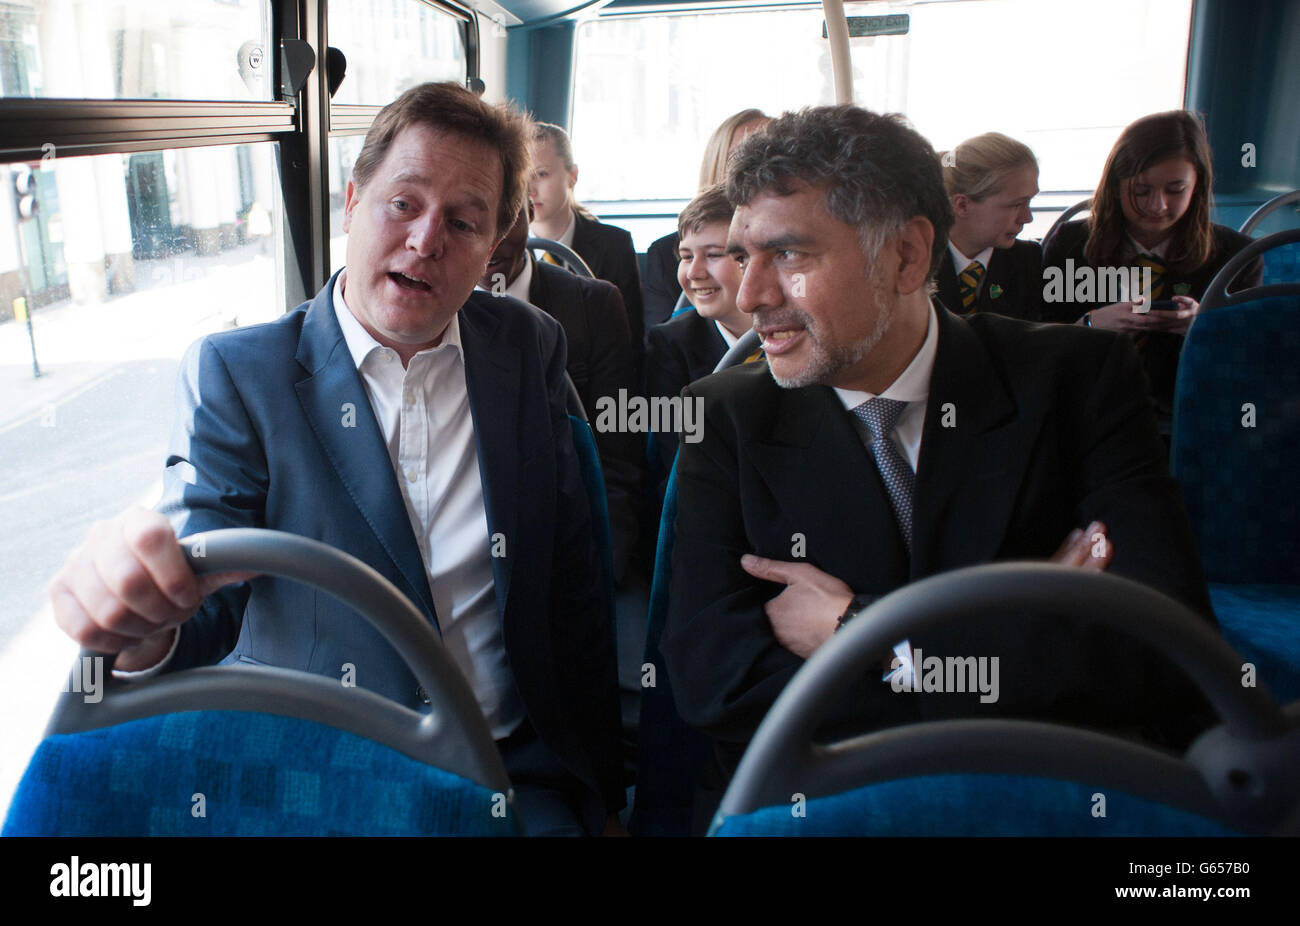 Deputy Prime Minister Nick Clegg and business entrepreneur James Caan meet teenagers aboard a bus travelling to several companies in London to discuss future career opportunities and how to get on the employment ladder, as part of the government's Opening Doors Awards in which companies are encouraged to help young people into work placements. Stock Photo